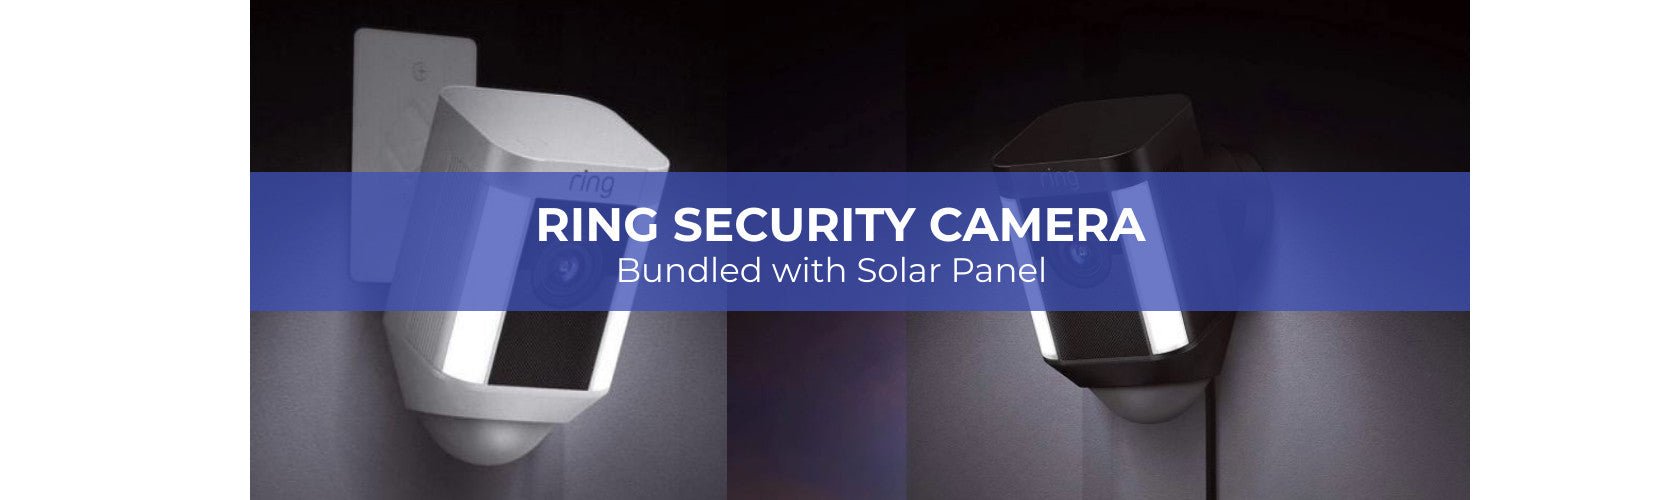 Best Ring Outdoor Security Camera and Solar Panel Bundles